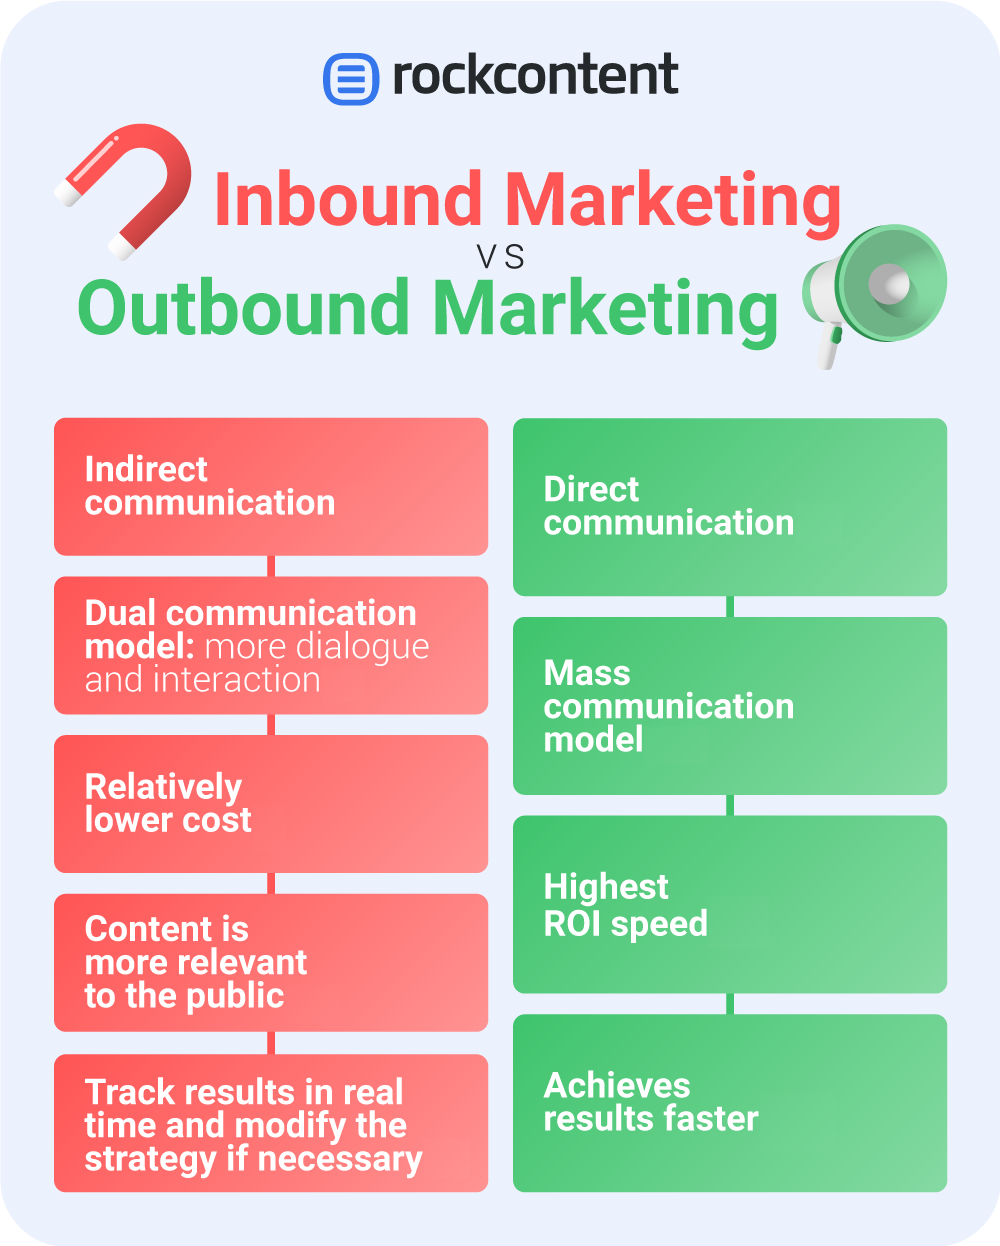 differences between Outbound Marketing and Inbound Marketing